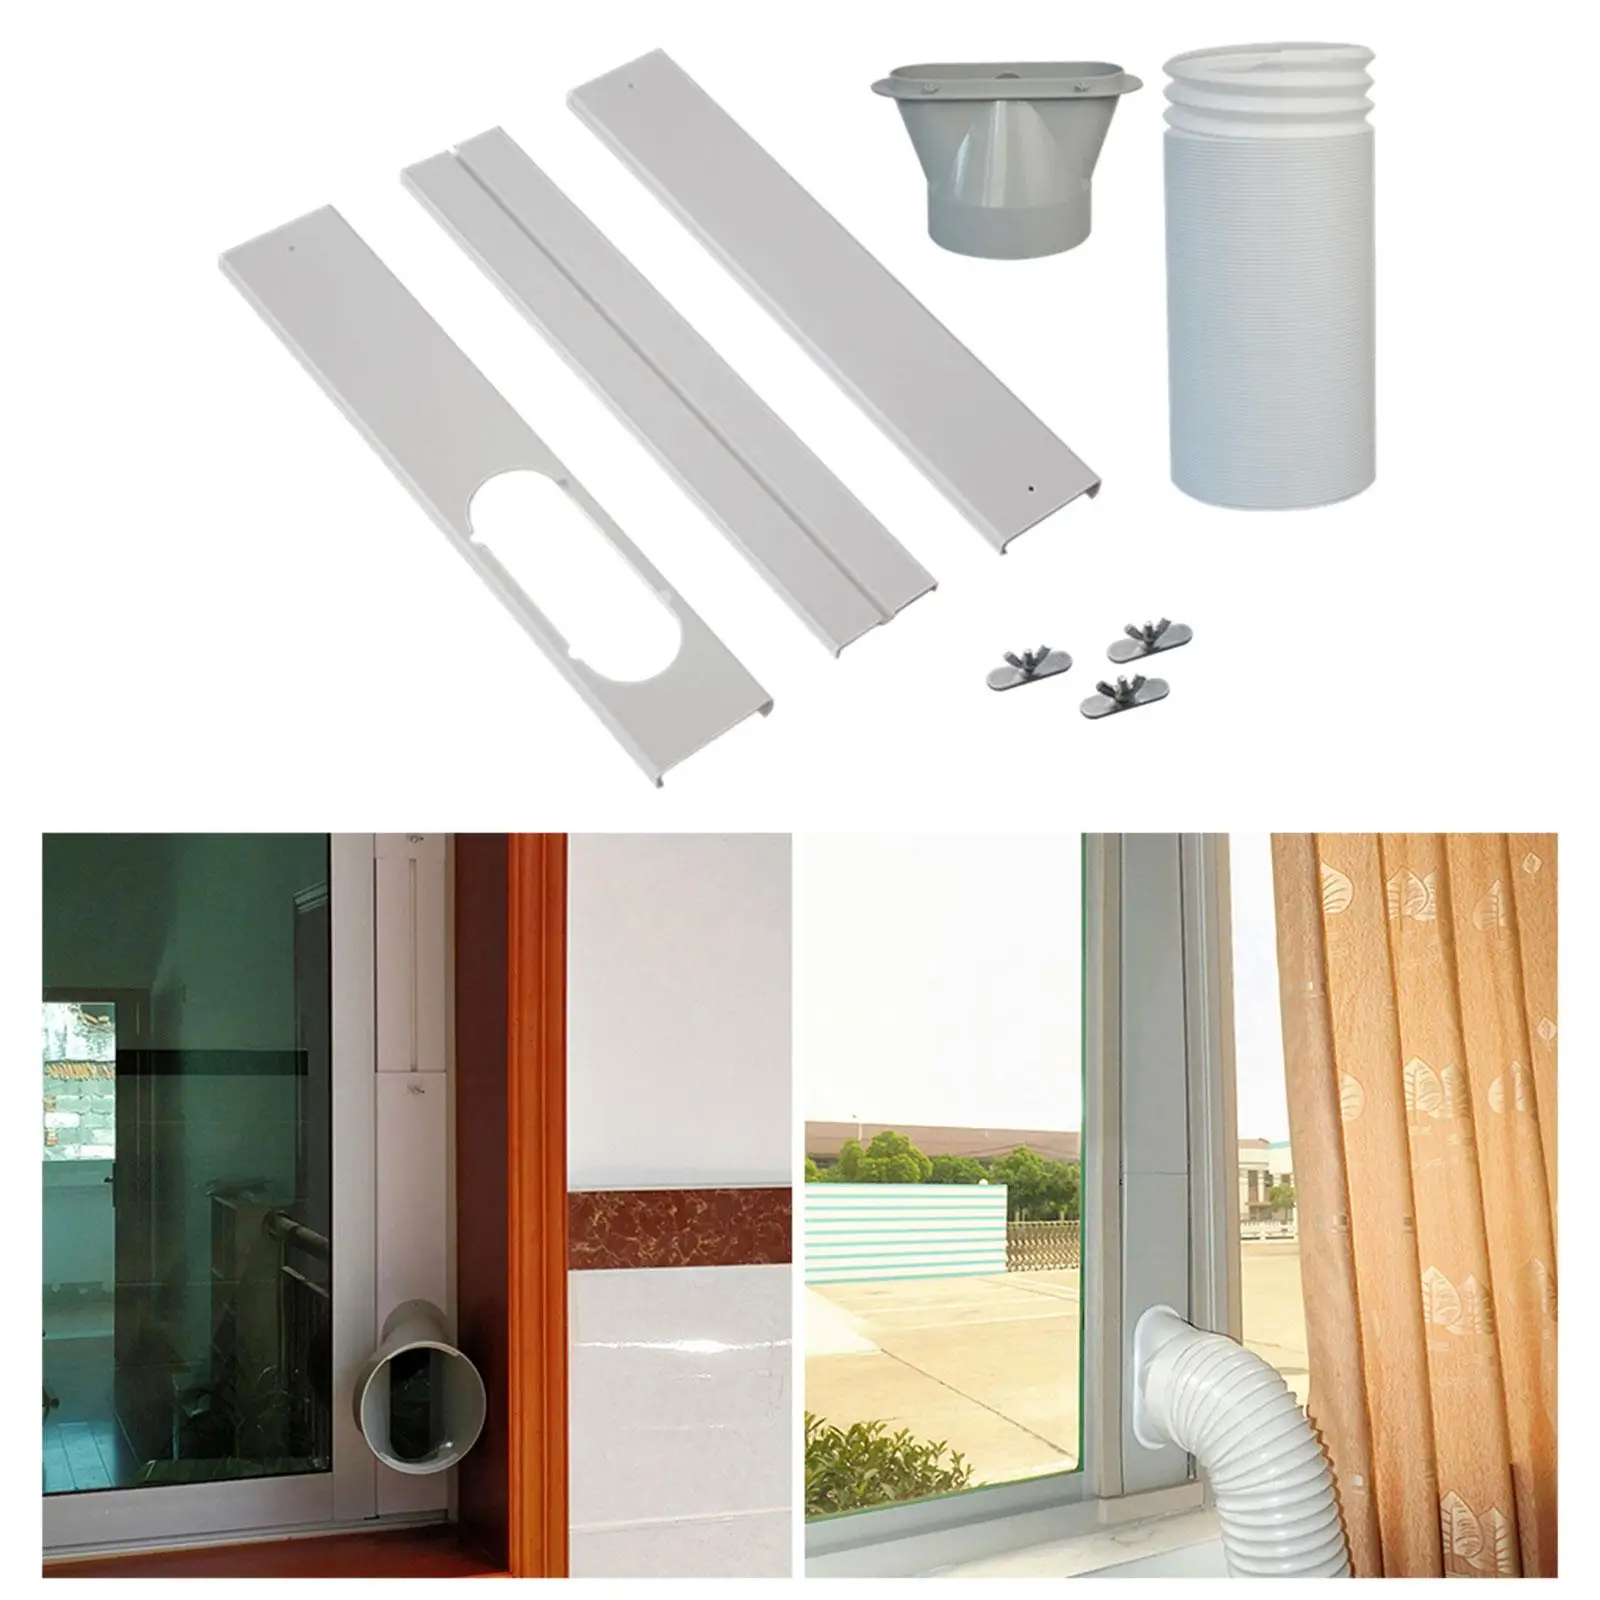 Portable Air Conditioner Window Vent Kit Replacement Window Seal for Portable Air Conditioner for Horizontal or Vertical Windows